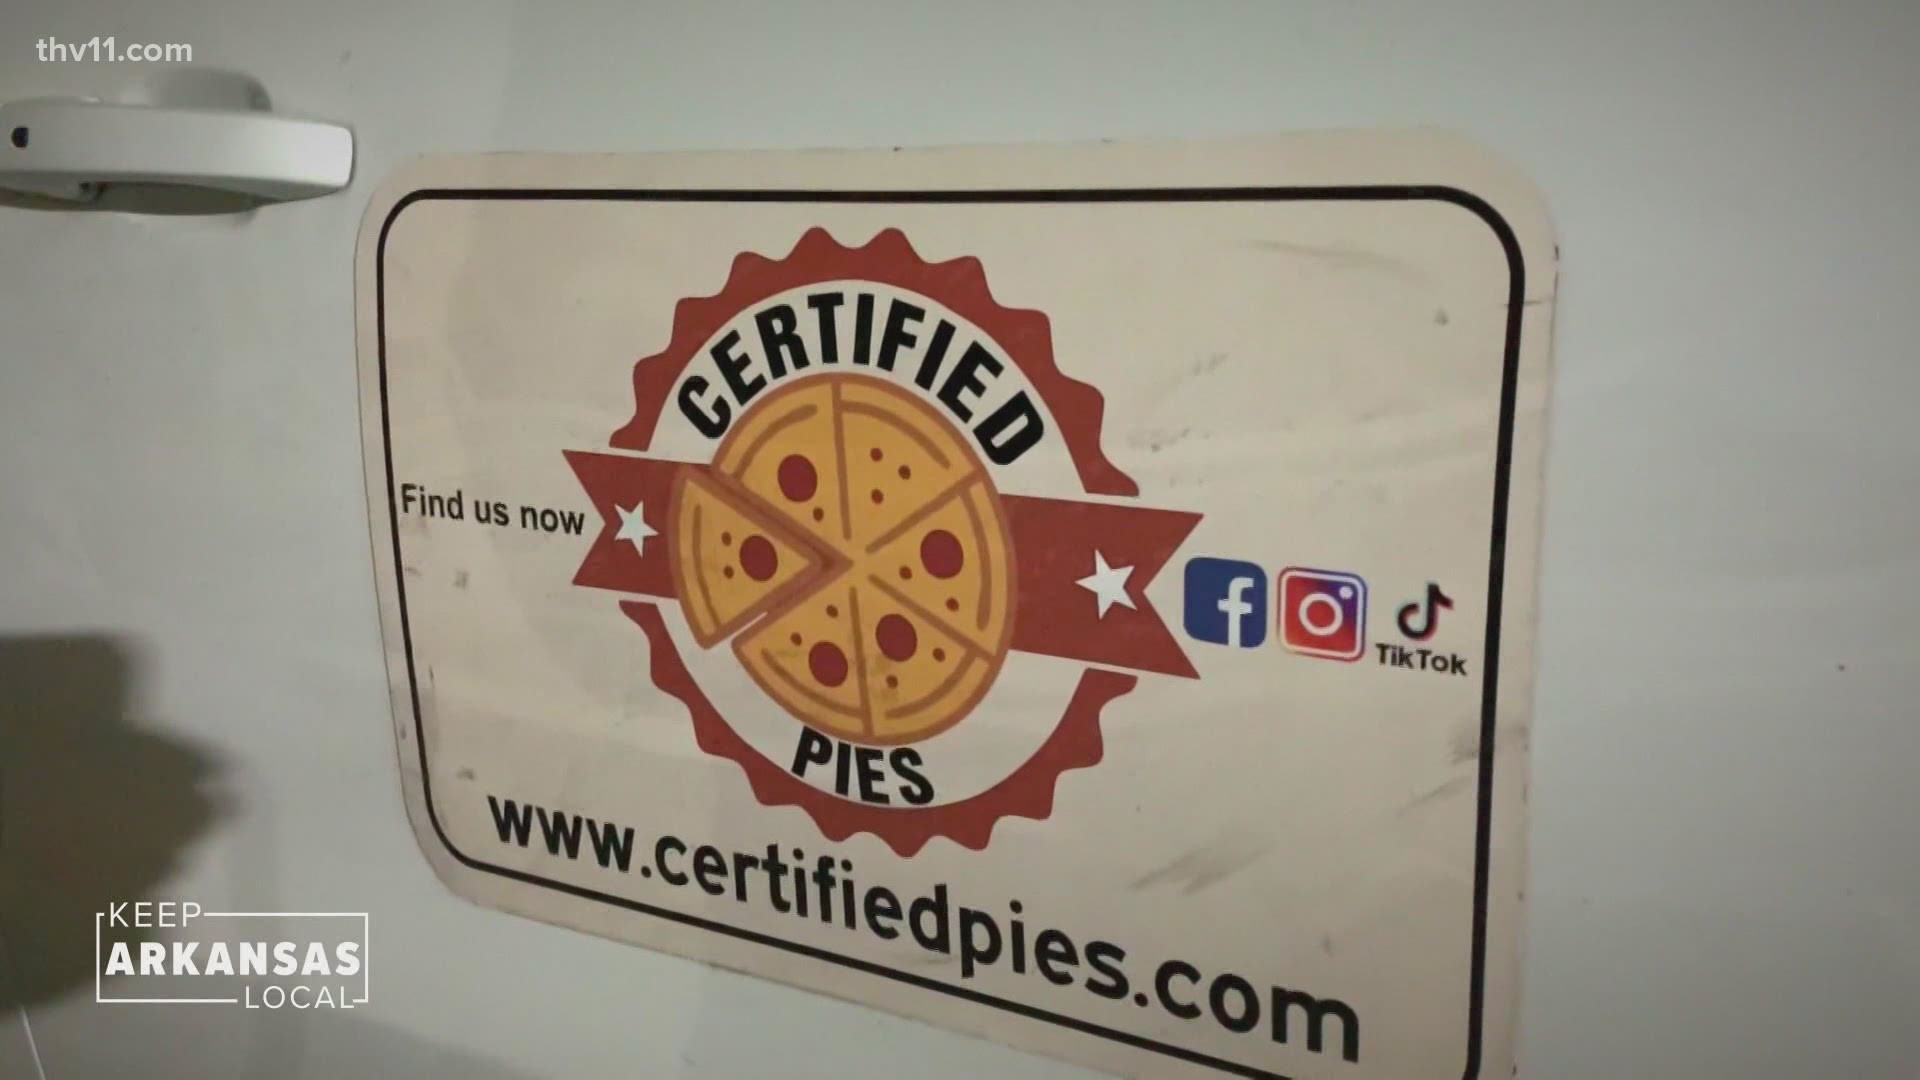 We want to help keep Arkansas local, by spotlighting a few small businesses that we think you'll love! Today, meet Little Rock's Certified Pies.